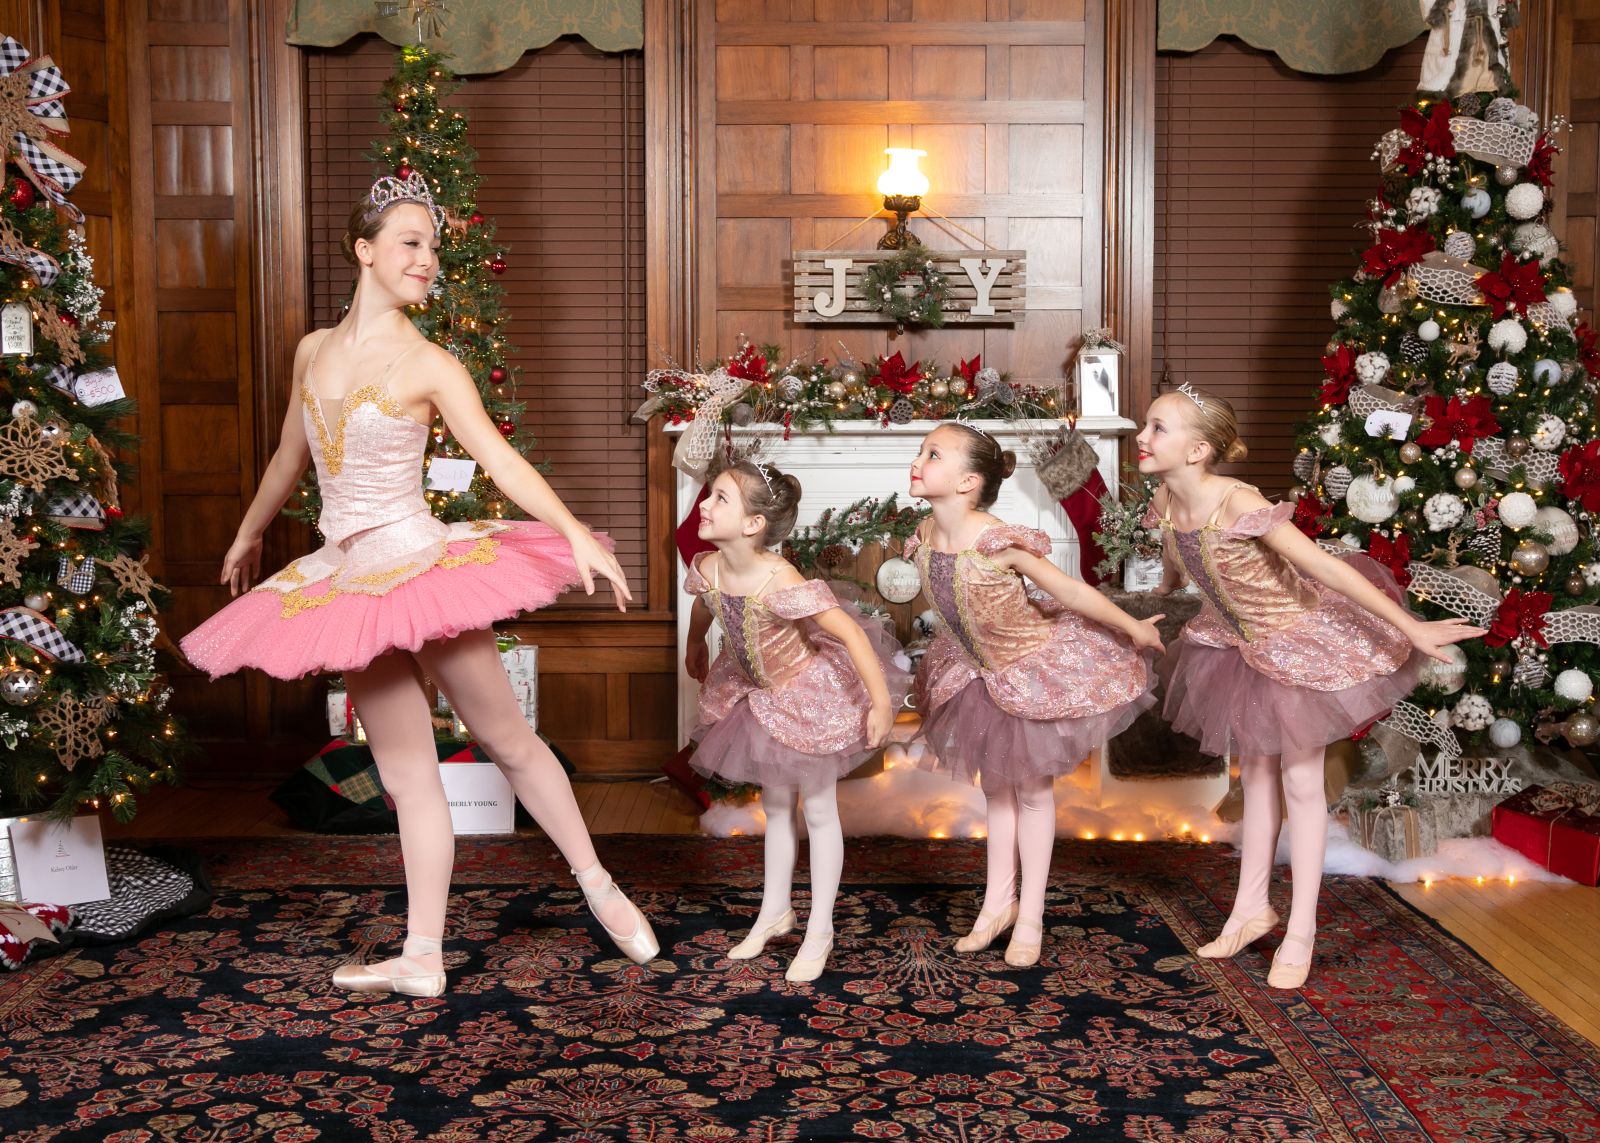 Three young girls in tutus lean toward a tall ballerina. They are in front of tw